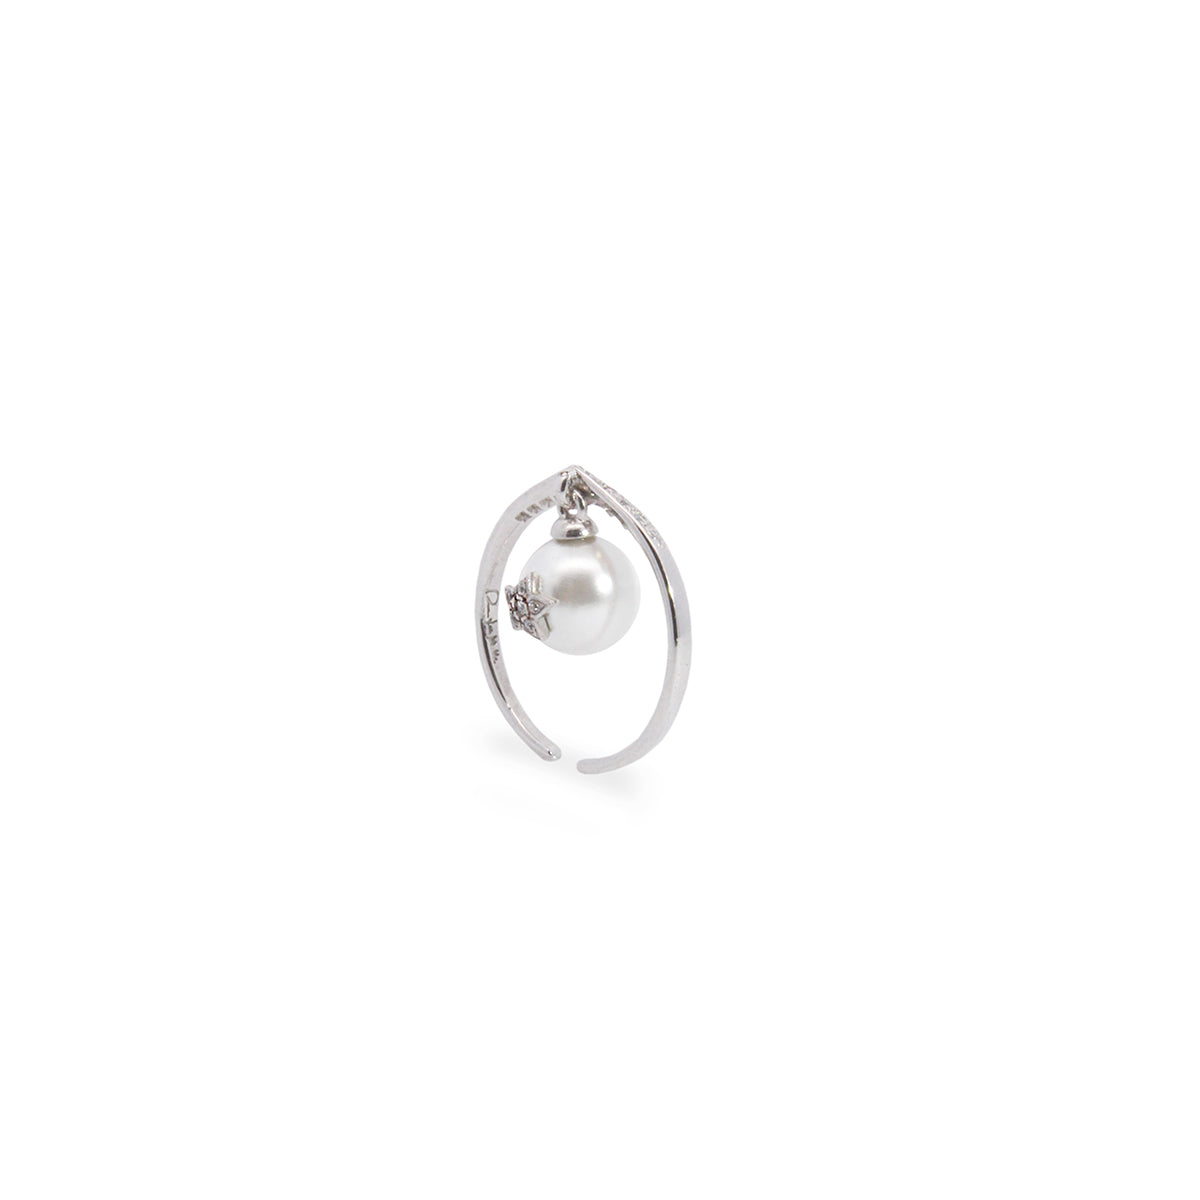 Rings - RIGID RING WITH CENTRAL STONE AND STAR - GALACTICA ICE - 1 | Rue des Mille